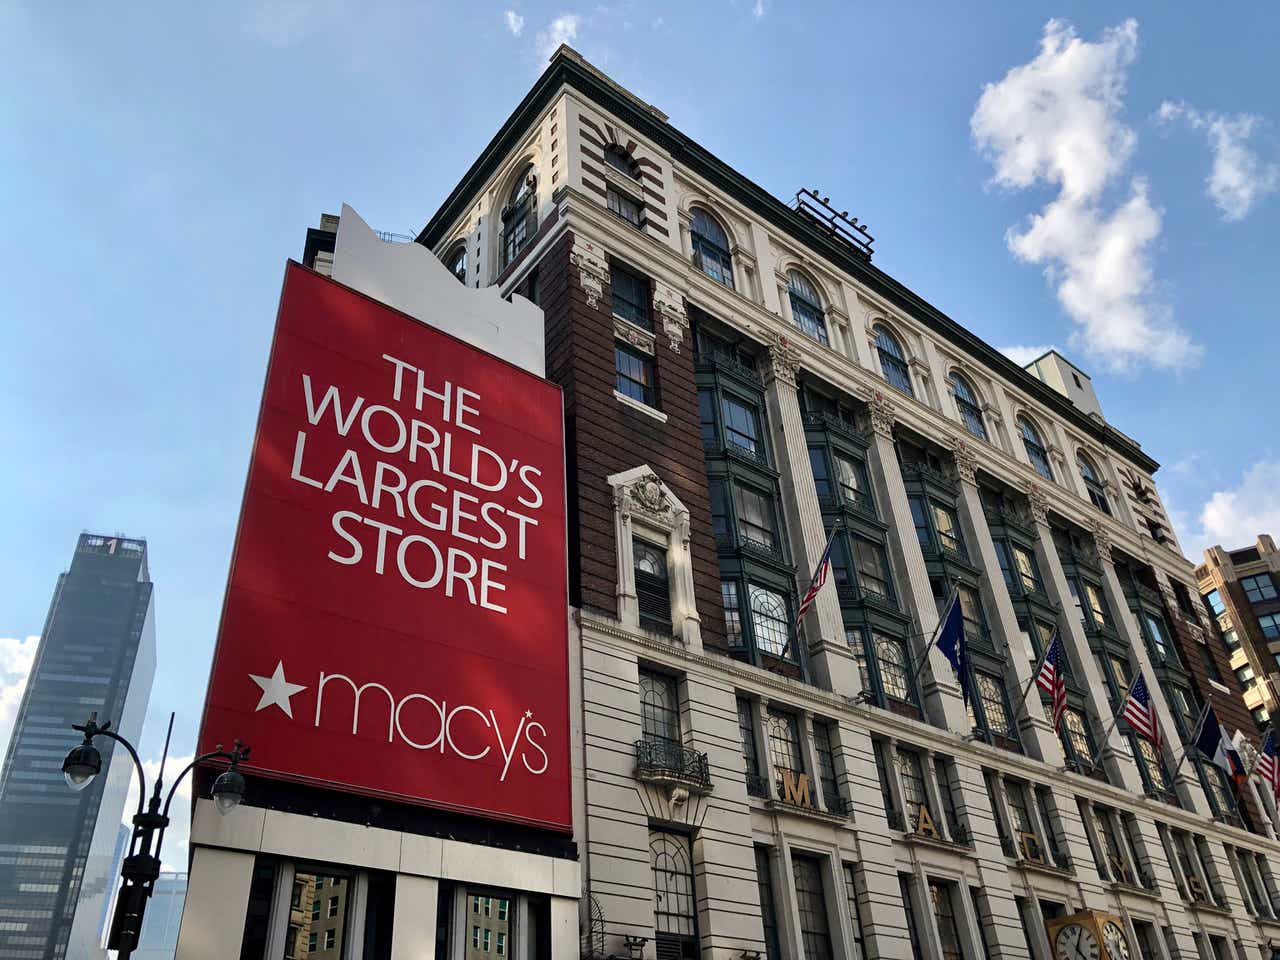 Macy's is updating its shopping experience by turning employees